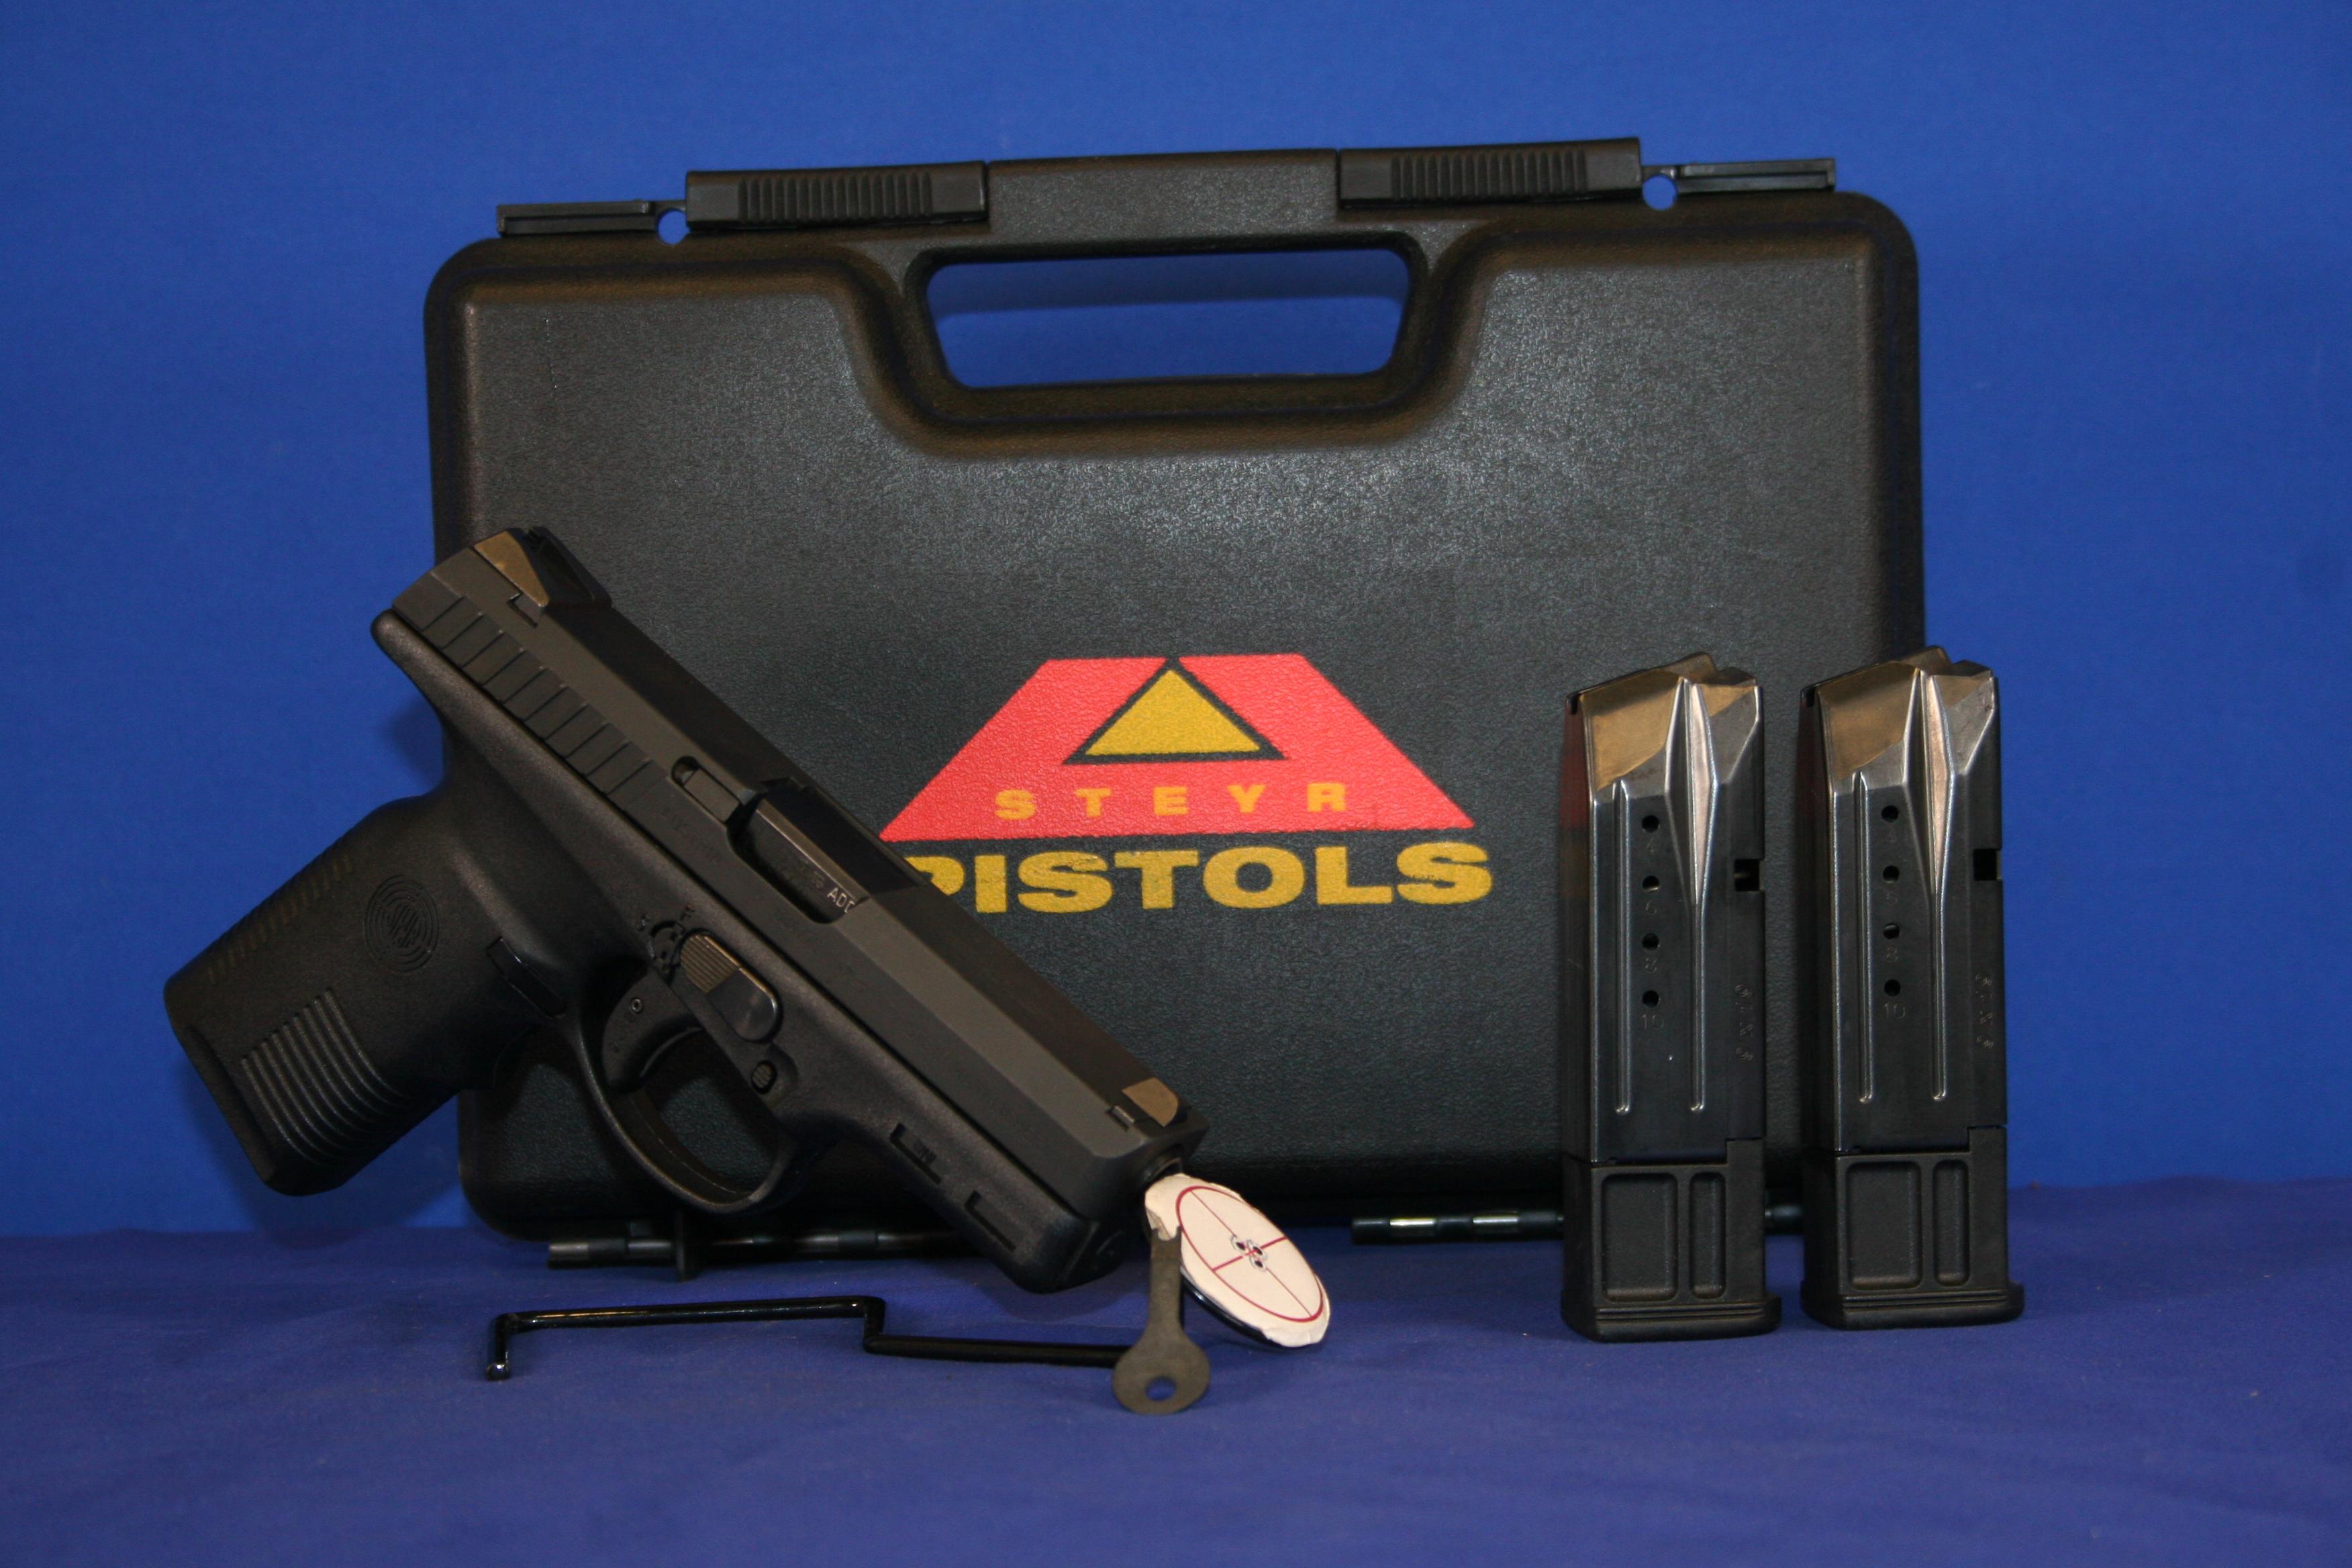 Steyr M9 9mm Semi-Auto Pistol, 10-Round Magazines. SN# 004776. Not for Sale in California.